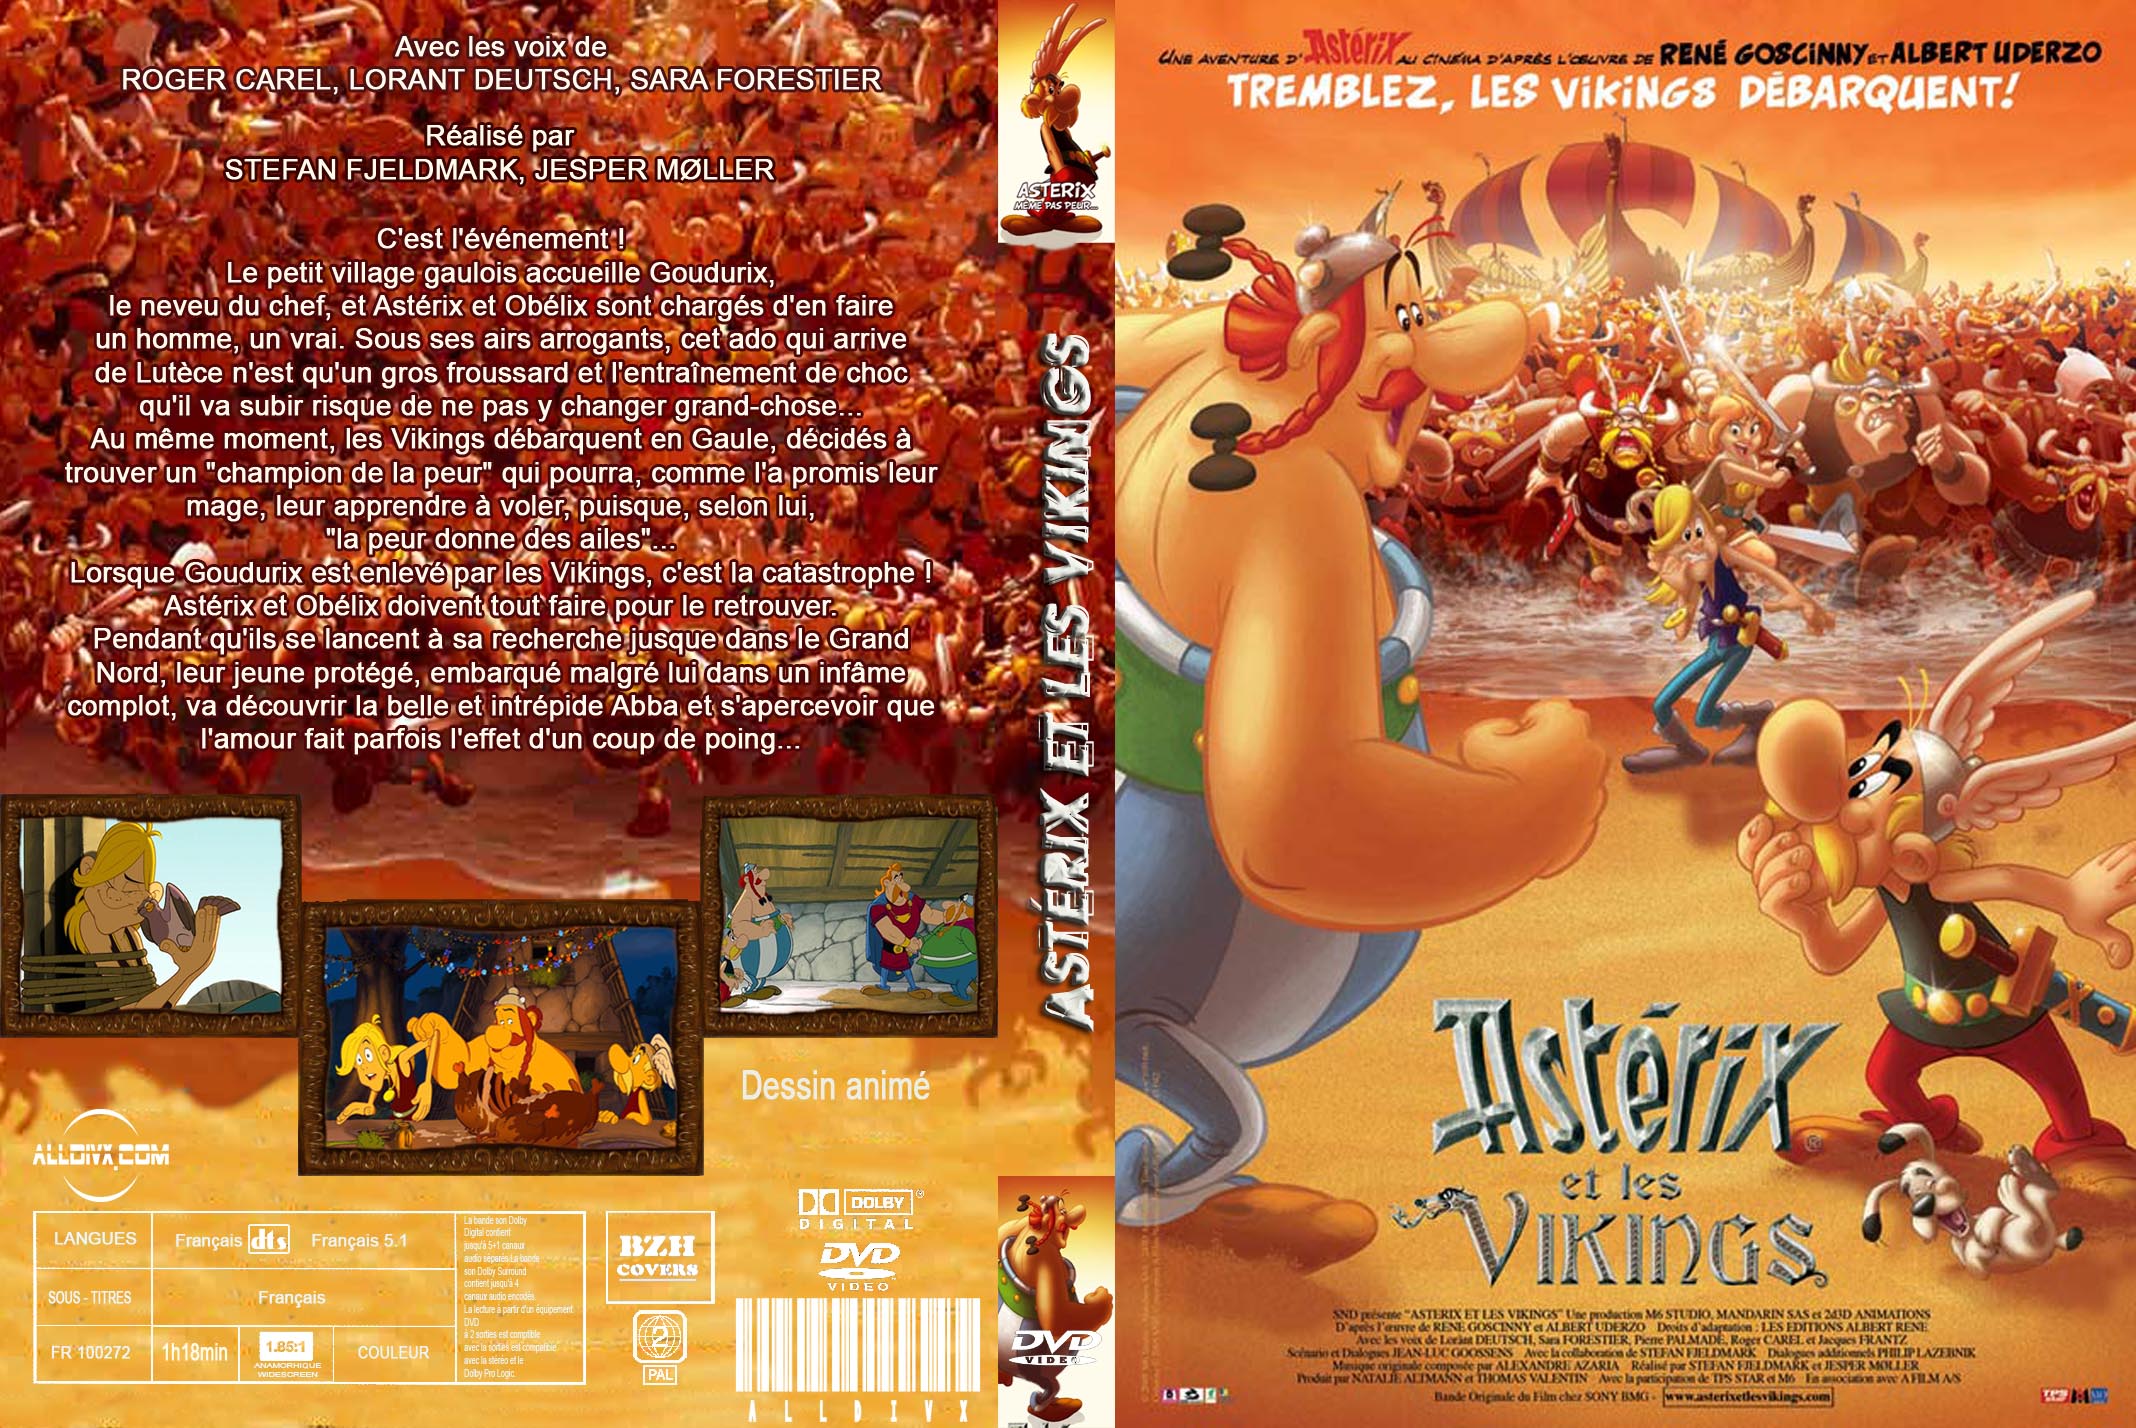 itunes movie posters asterix and the vikings